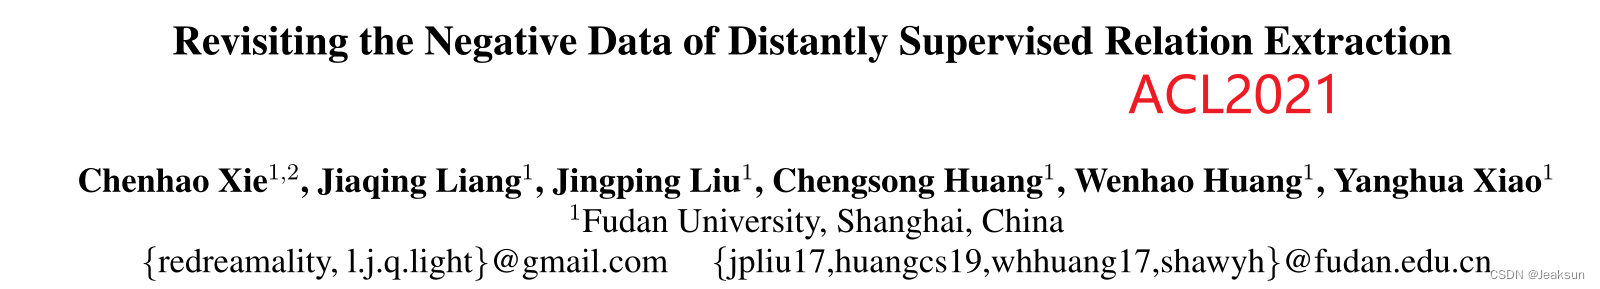 Revisiting the Negative Data of Distantly Supervised Relation Extraction重温远程监督关系抽取中的负数据